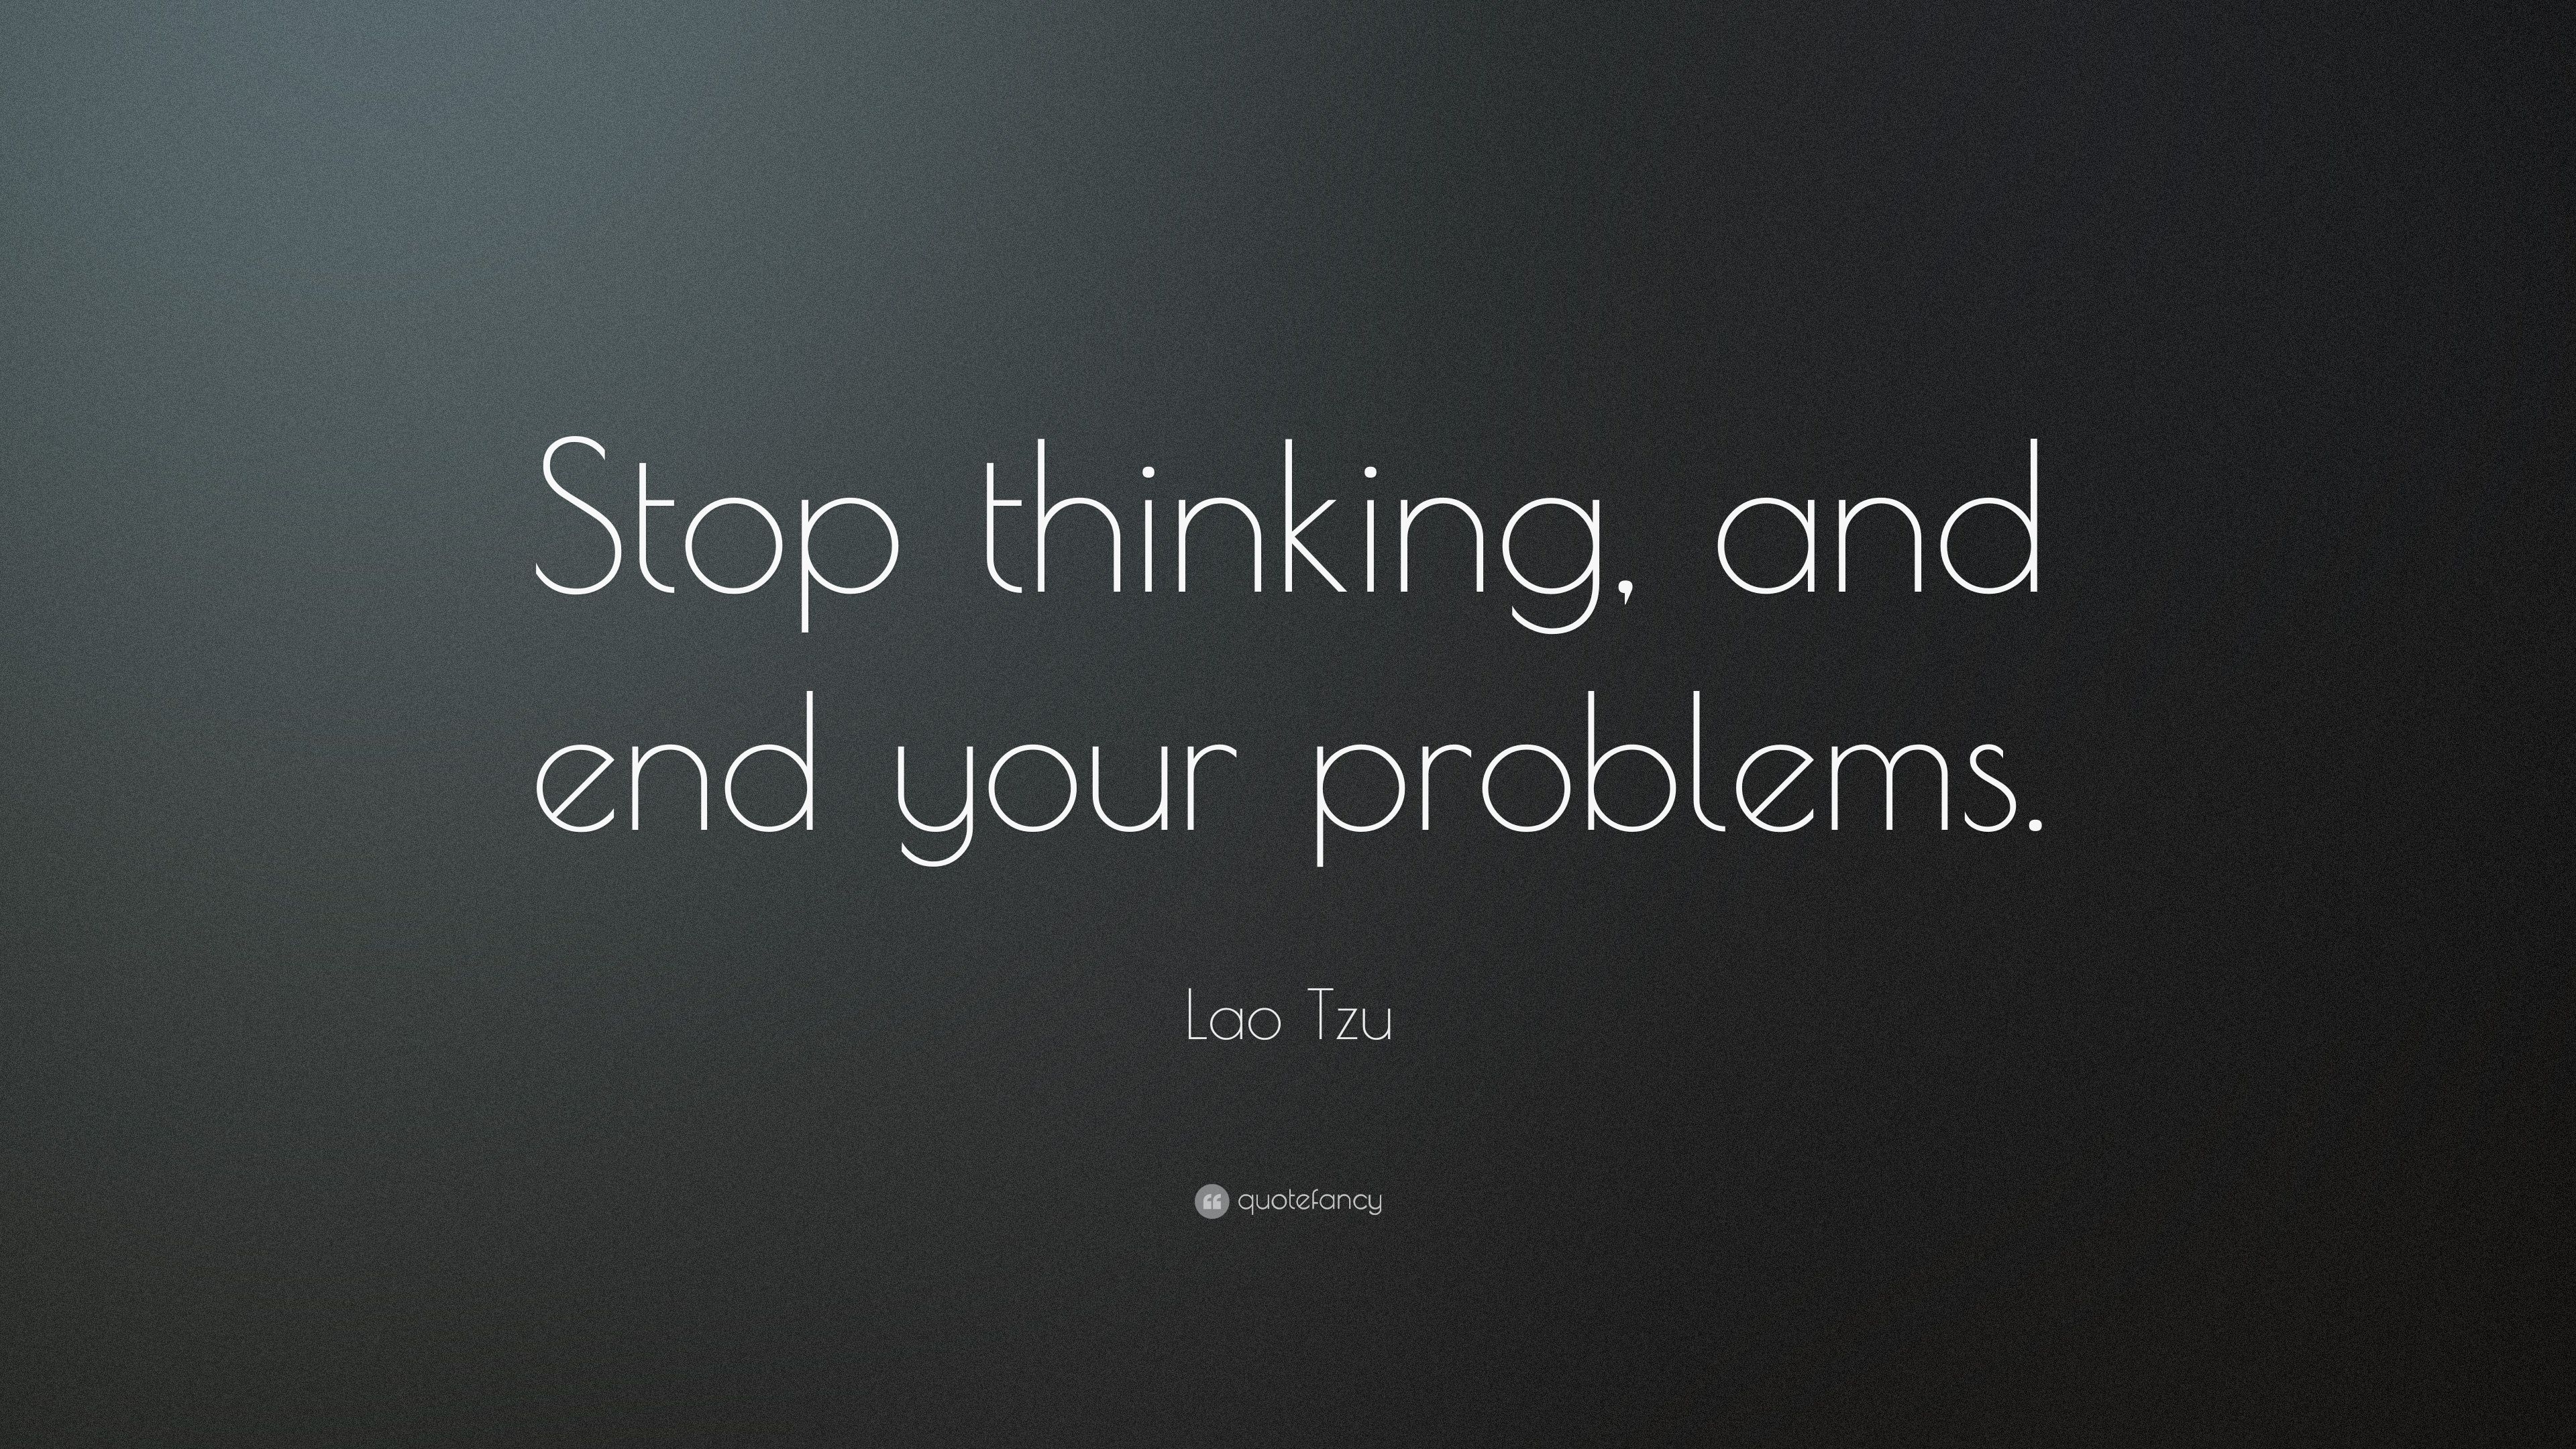 Lao Tzu Quote: “Stop thinking, and end your problems.” 22